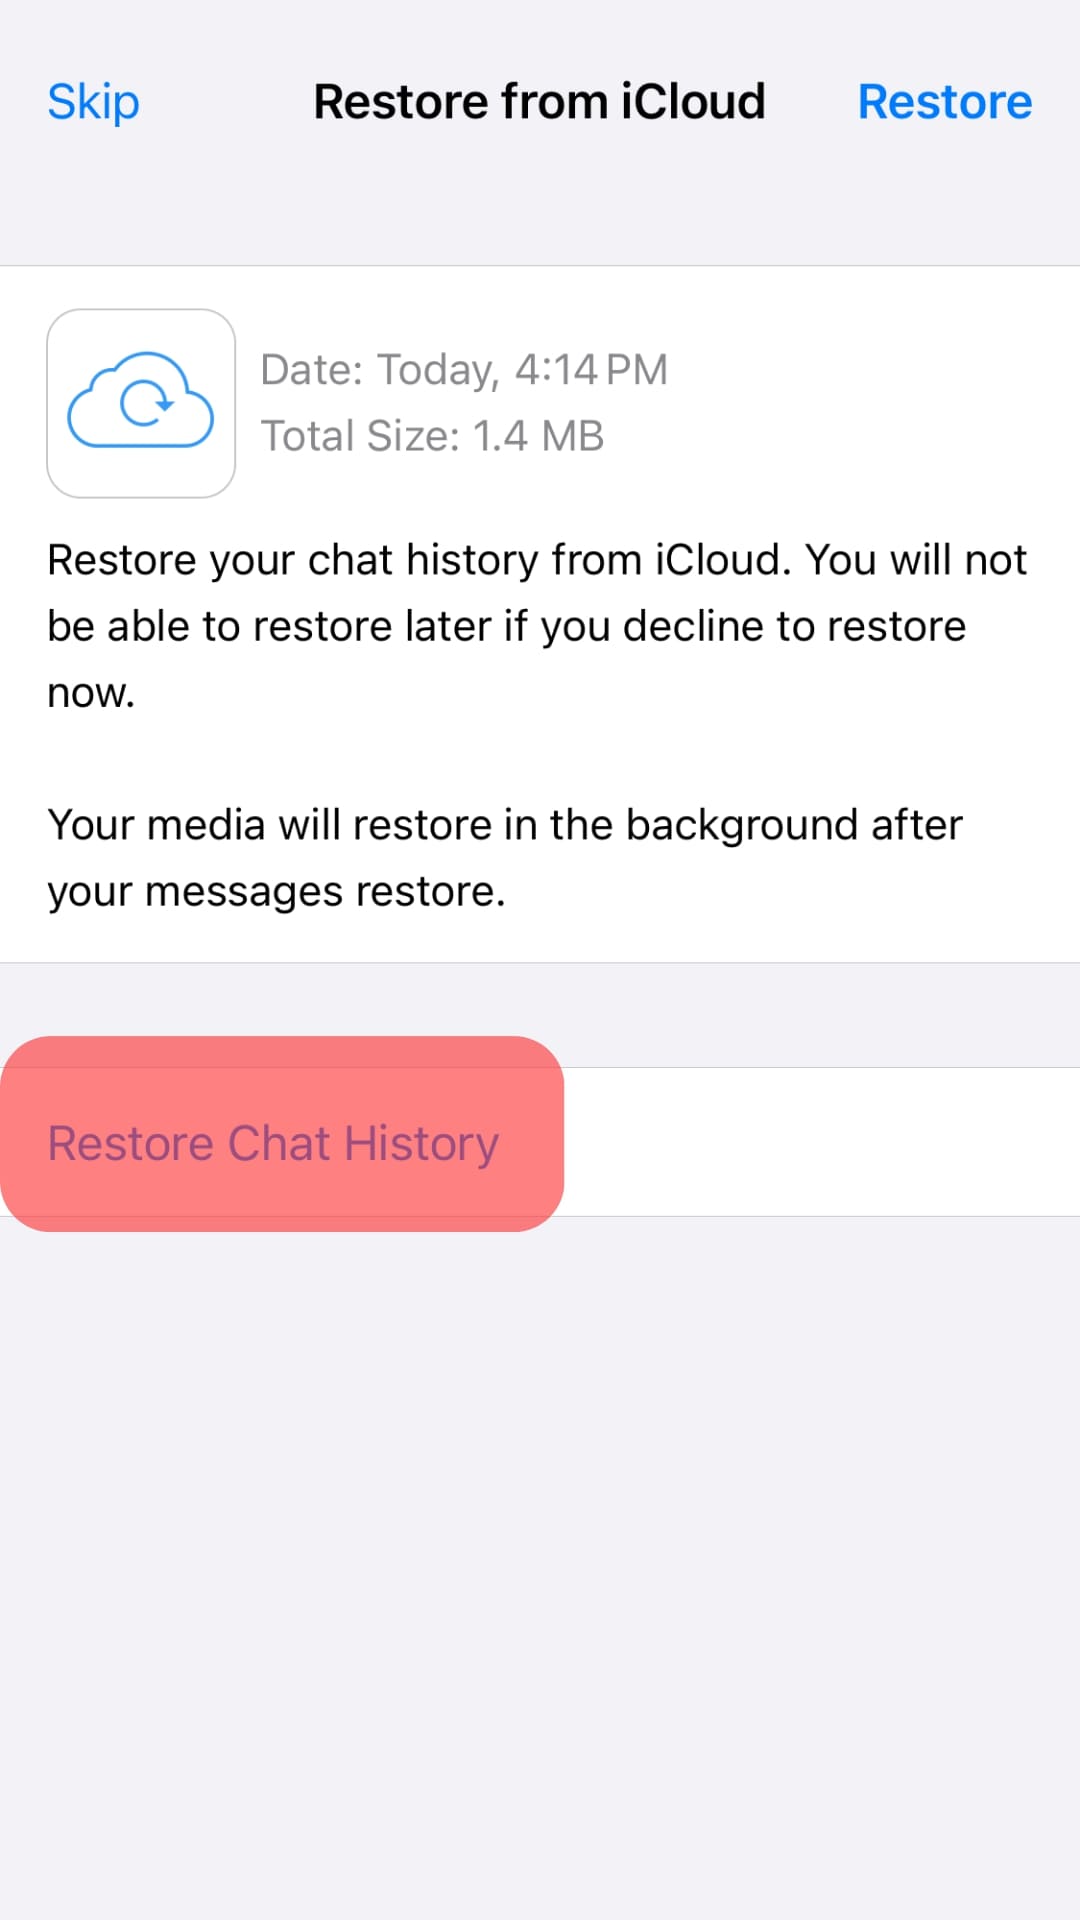 Click The Restore Chat History Button.